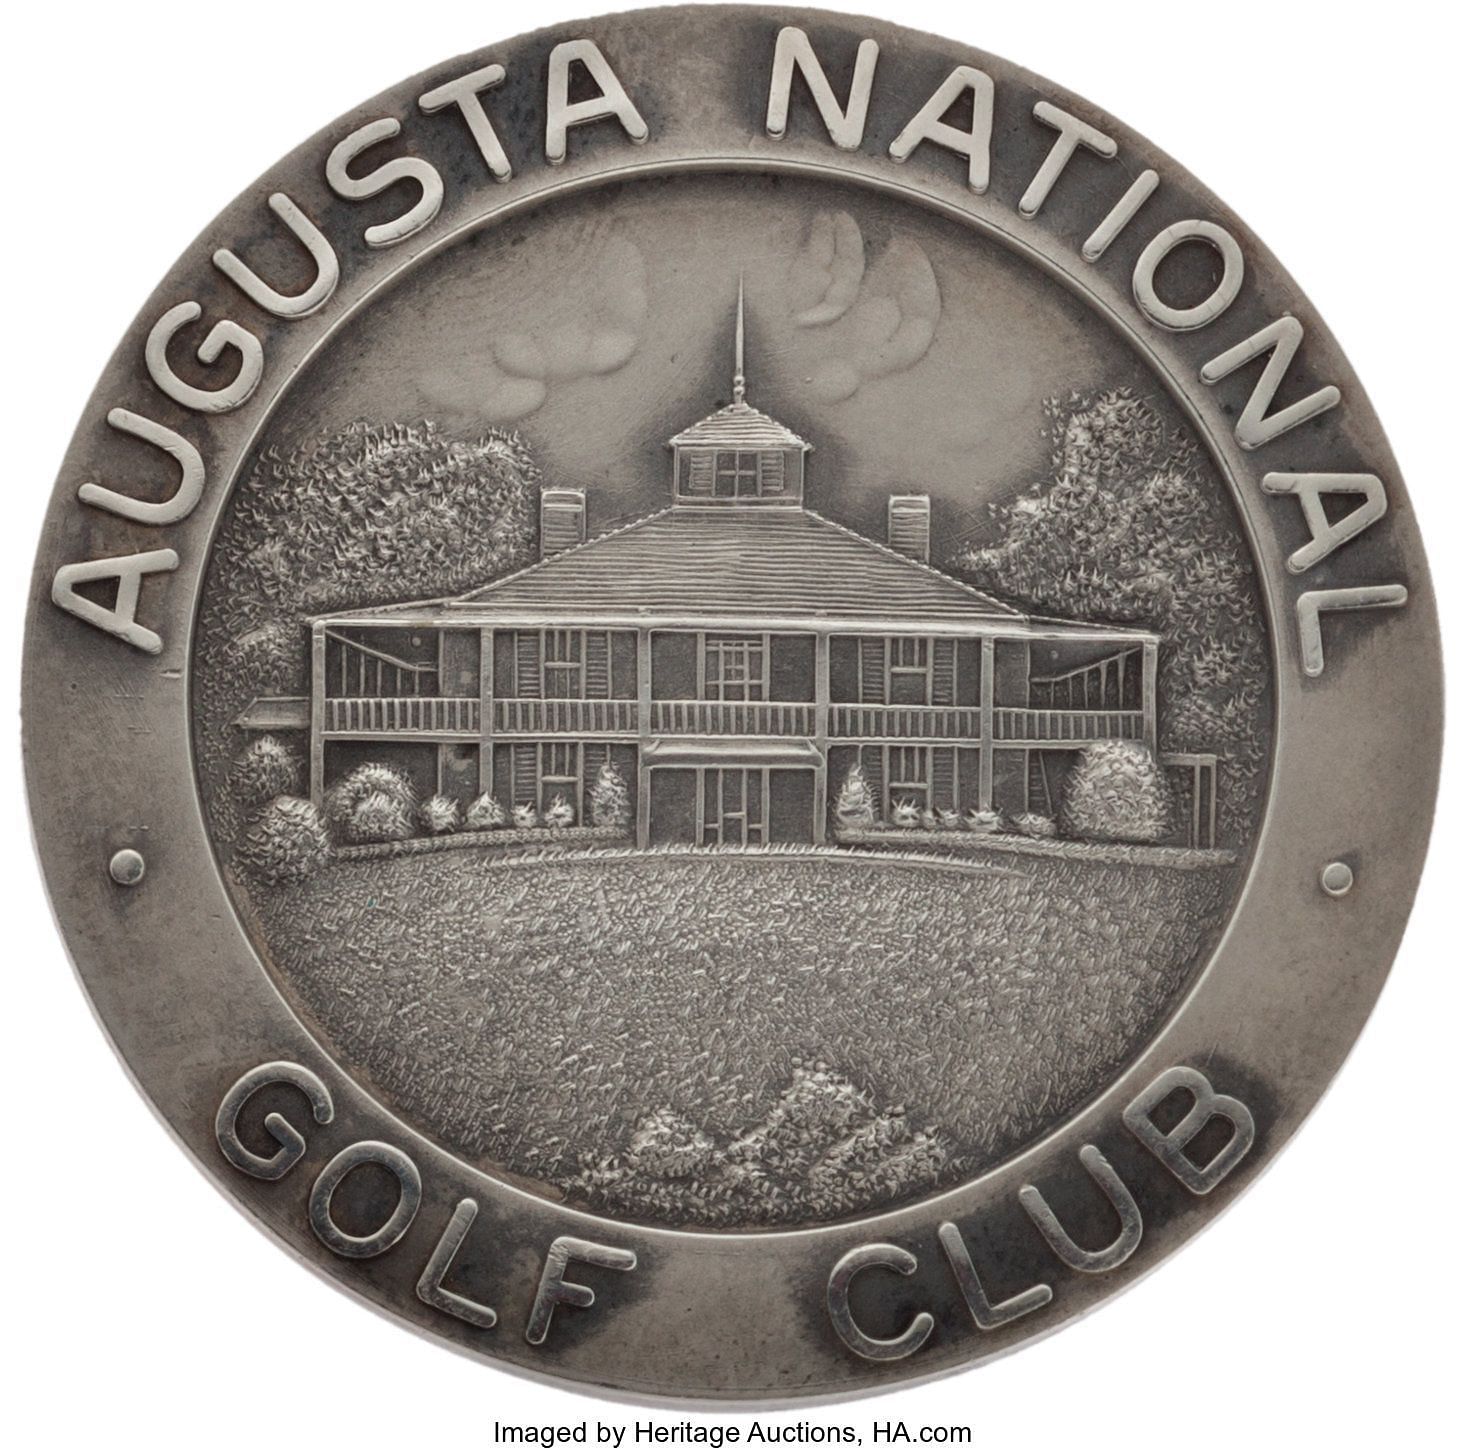 Tournament Runner-Up Medal (Image via Heritage Auctions)